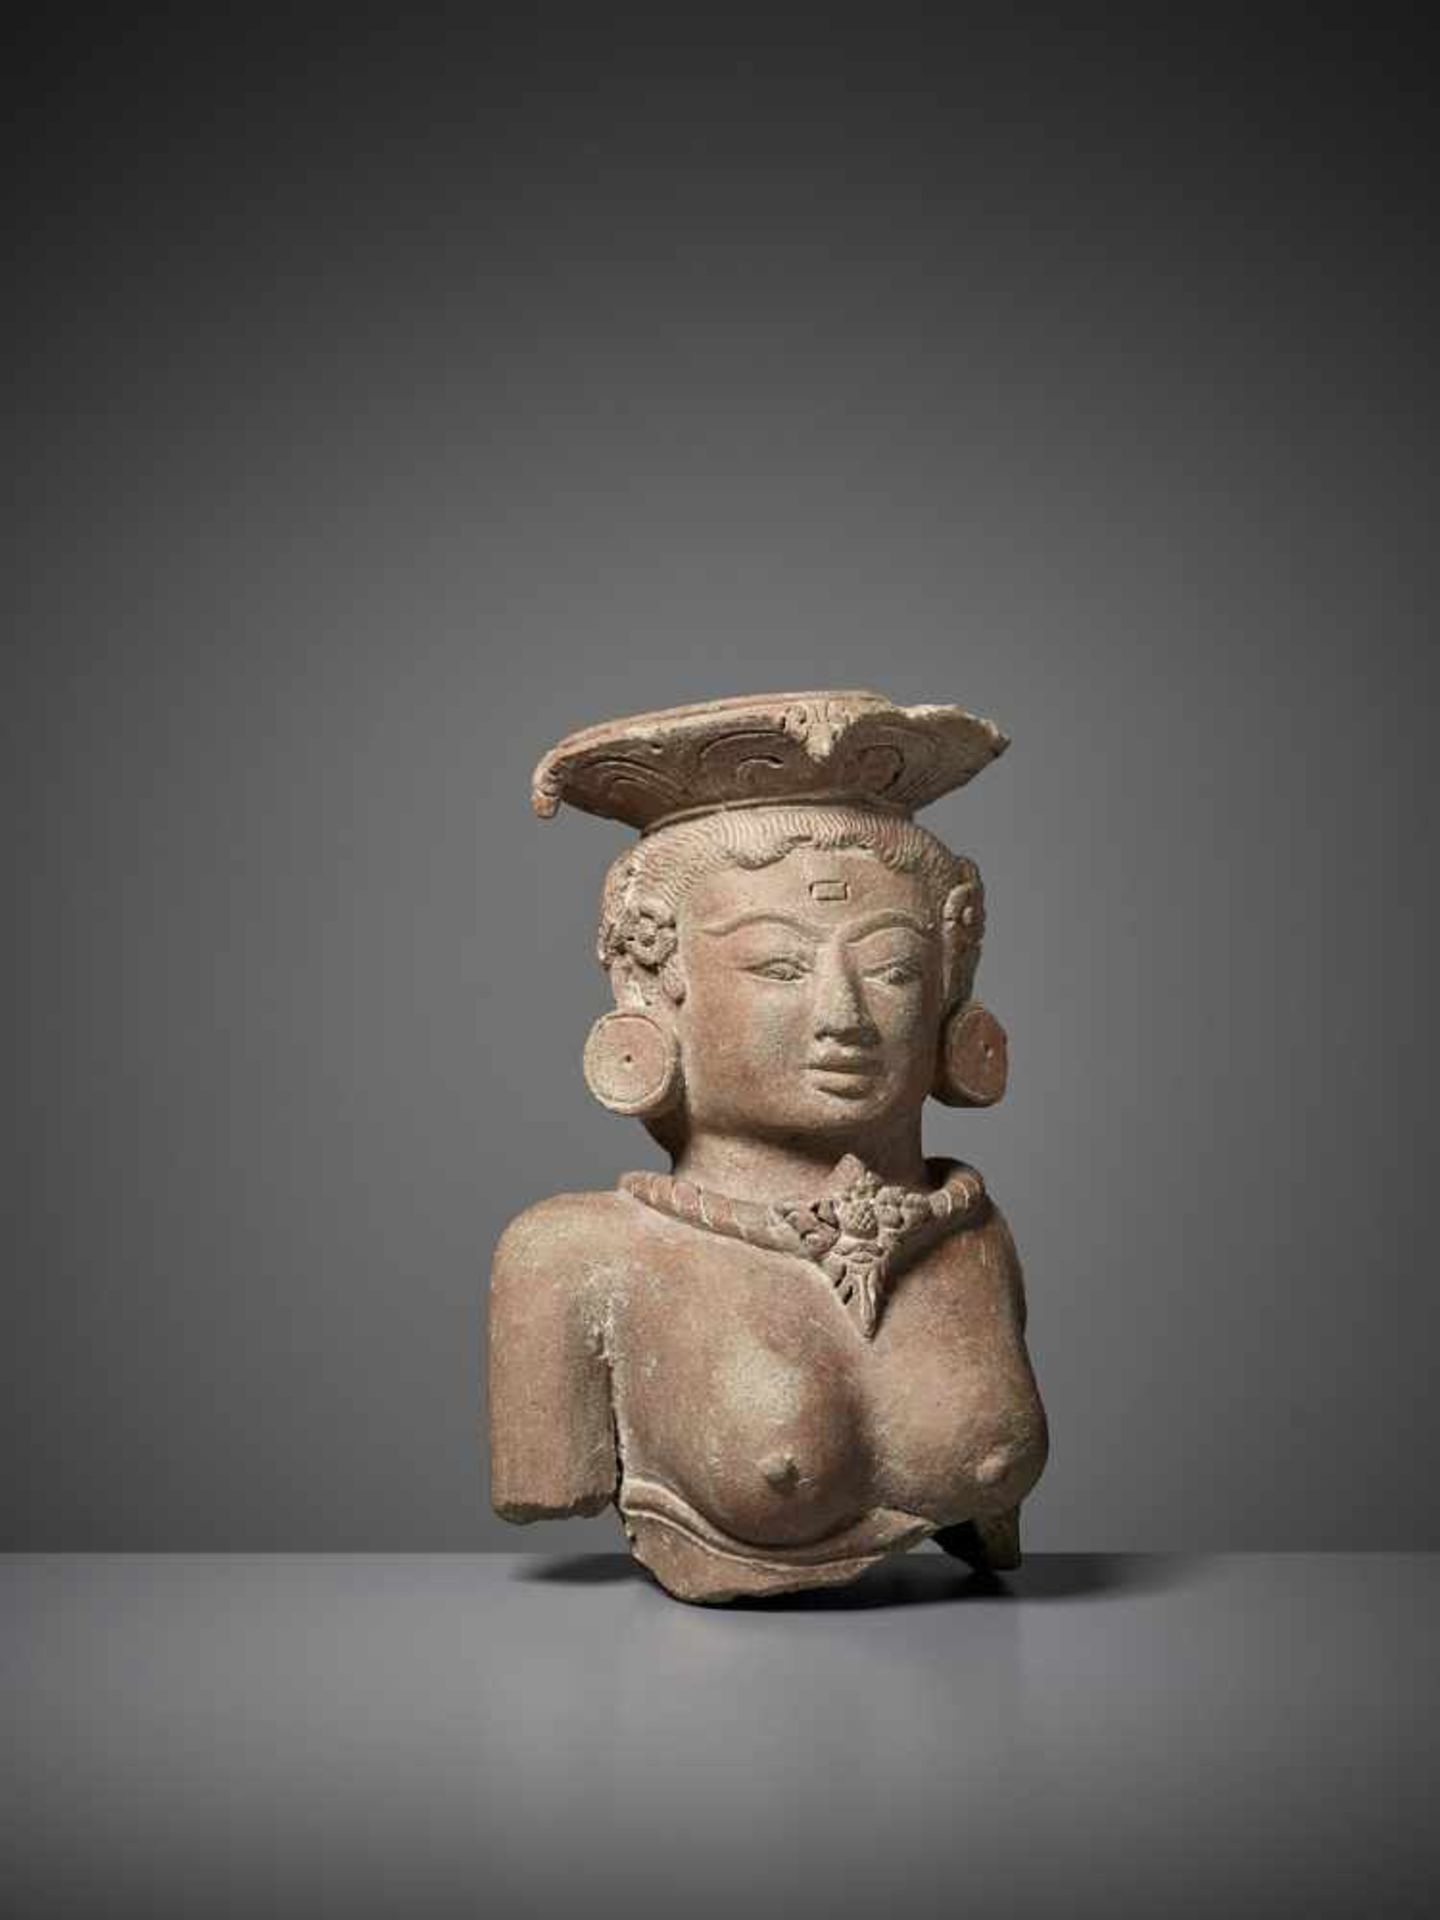 A FEMALE MAJAPAHIT TERRACOTTA BUST Indonesia, Java, 14th – 15th century. This elaborate and